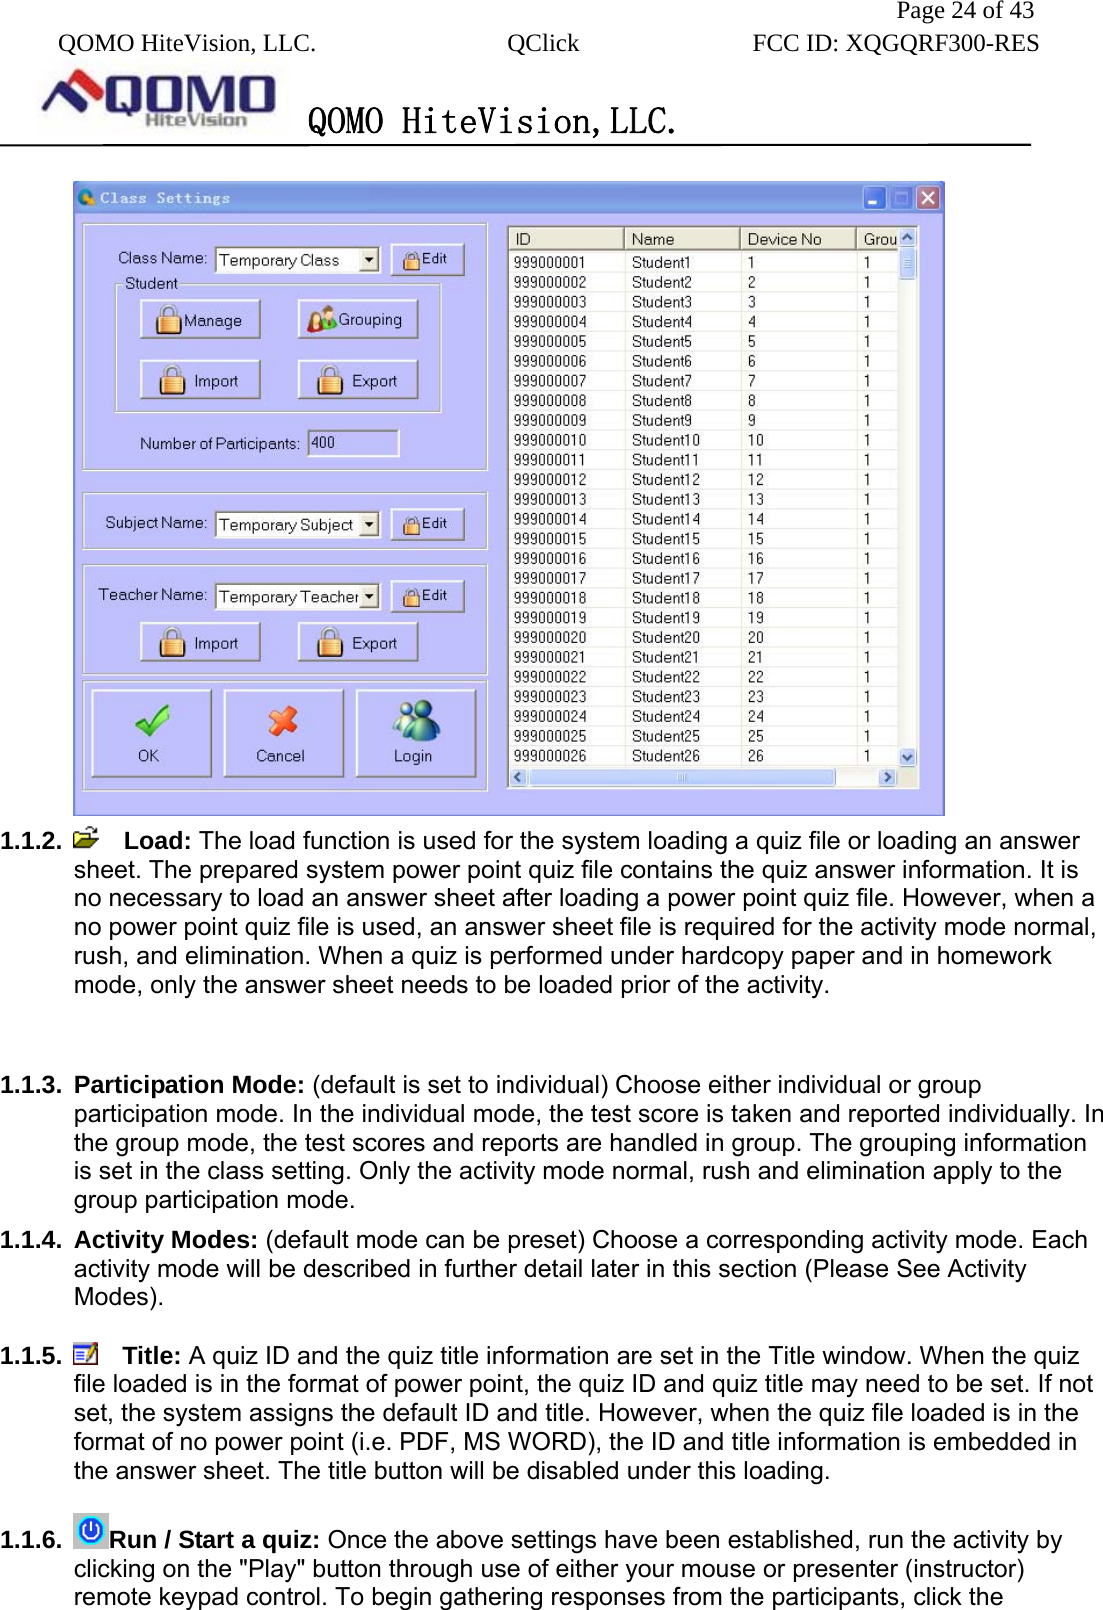               Page 24 of 43  QOMO HiteVision, LLC.  QClick        FCC ID: XQGQRF300-RES      QOMO HiteVision,LLC.    1.1.2.    Load: The load function is used for the system loading a quiz file or loading an answer sheet. The prepared system power point quiz file contains the quiz answer information. It is no necessary to load an answer sheet after loading a power point quiz file. However, when a no power point quiz file is used, an answer sheet file is required for the activity mode normal, rush, and elimination. When a quiz is performed under hardcopy paper and in homework mode, only the answer sheet needs to be loaded prior of the activity.  1.1.3. Participation Mode: (default is set to individual) Choose either individual or group participation mode. In the individual mode, the test score is taken and reported individually. In the group mode, the test scores and reports are handled in group. The grouping information is set in the class setting. Only the activity mode normal, rush and elimination apply to the group participation mode. 1.1.4. Activity Modes: (default mode can be preset) Choose a corresponding activity mode. Each activity mode will be described in further detail later in this section (Please See Activity Modes).  1.1.5.    Title: A quiz ID and the quiz title information are set in the Title window. When the quiz file loaded is in the format of power point, the quiz ID and quiz title may need to be set. If not set, the system assigns the default ID and title. However, when the quiz file loaded is in the format of no power point (i.e. PDF, MS WORD), the ID and title information is embedded in the answer sheet. The title button will be disabled under this loading.  1.1.6.  Run / Start a quiz: Once the above settings have been established, run the activity by clicking on the &quot;Play&quot; button through use of either your mouse or presenter (instructor) remote keypad control. To begin gathering responses from the participants, click the 